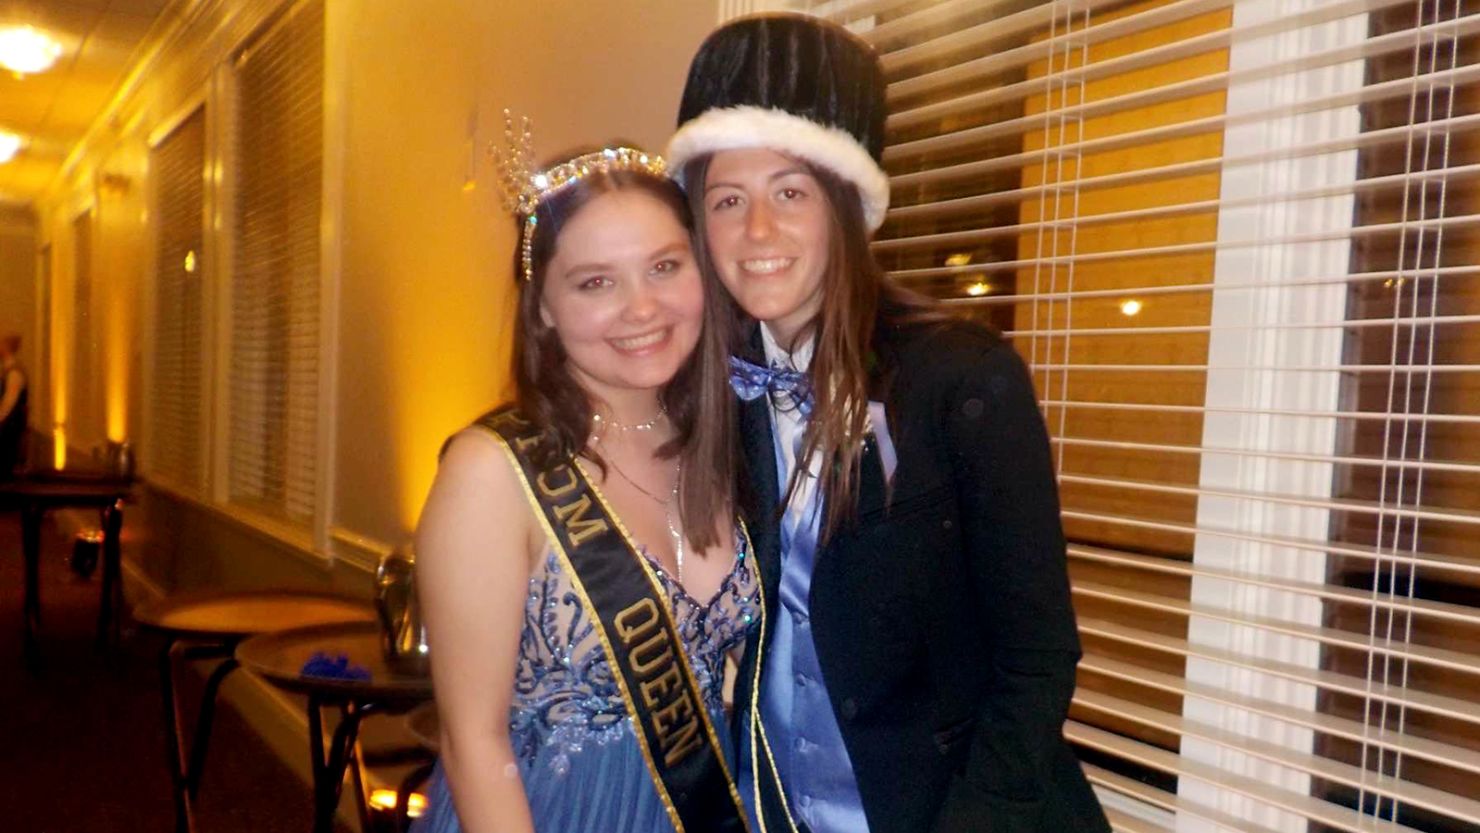 Riley Loudermilk and Annie Wise were crowned prom king and queen on April 17.